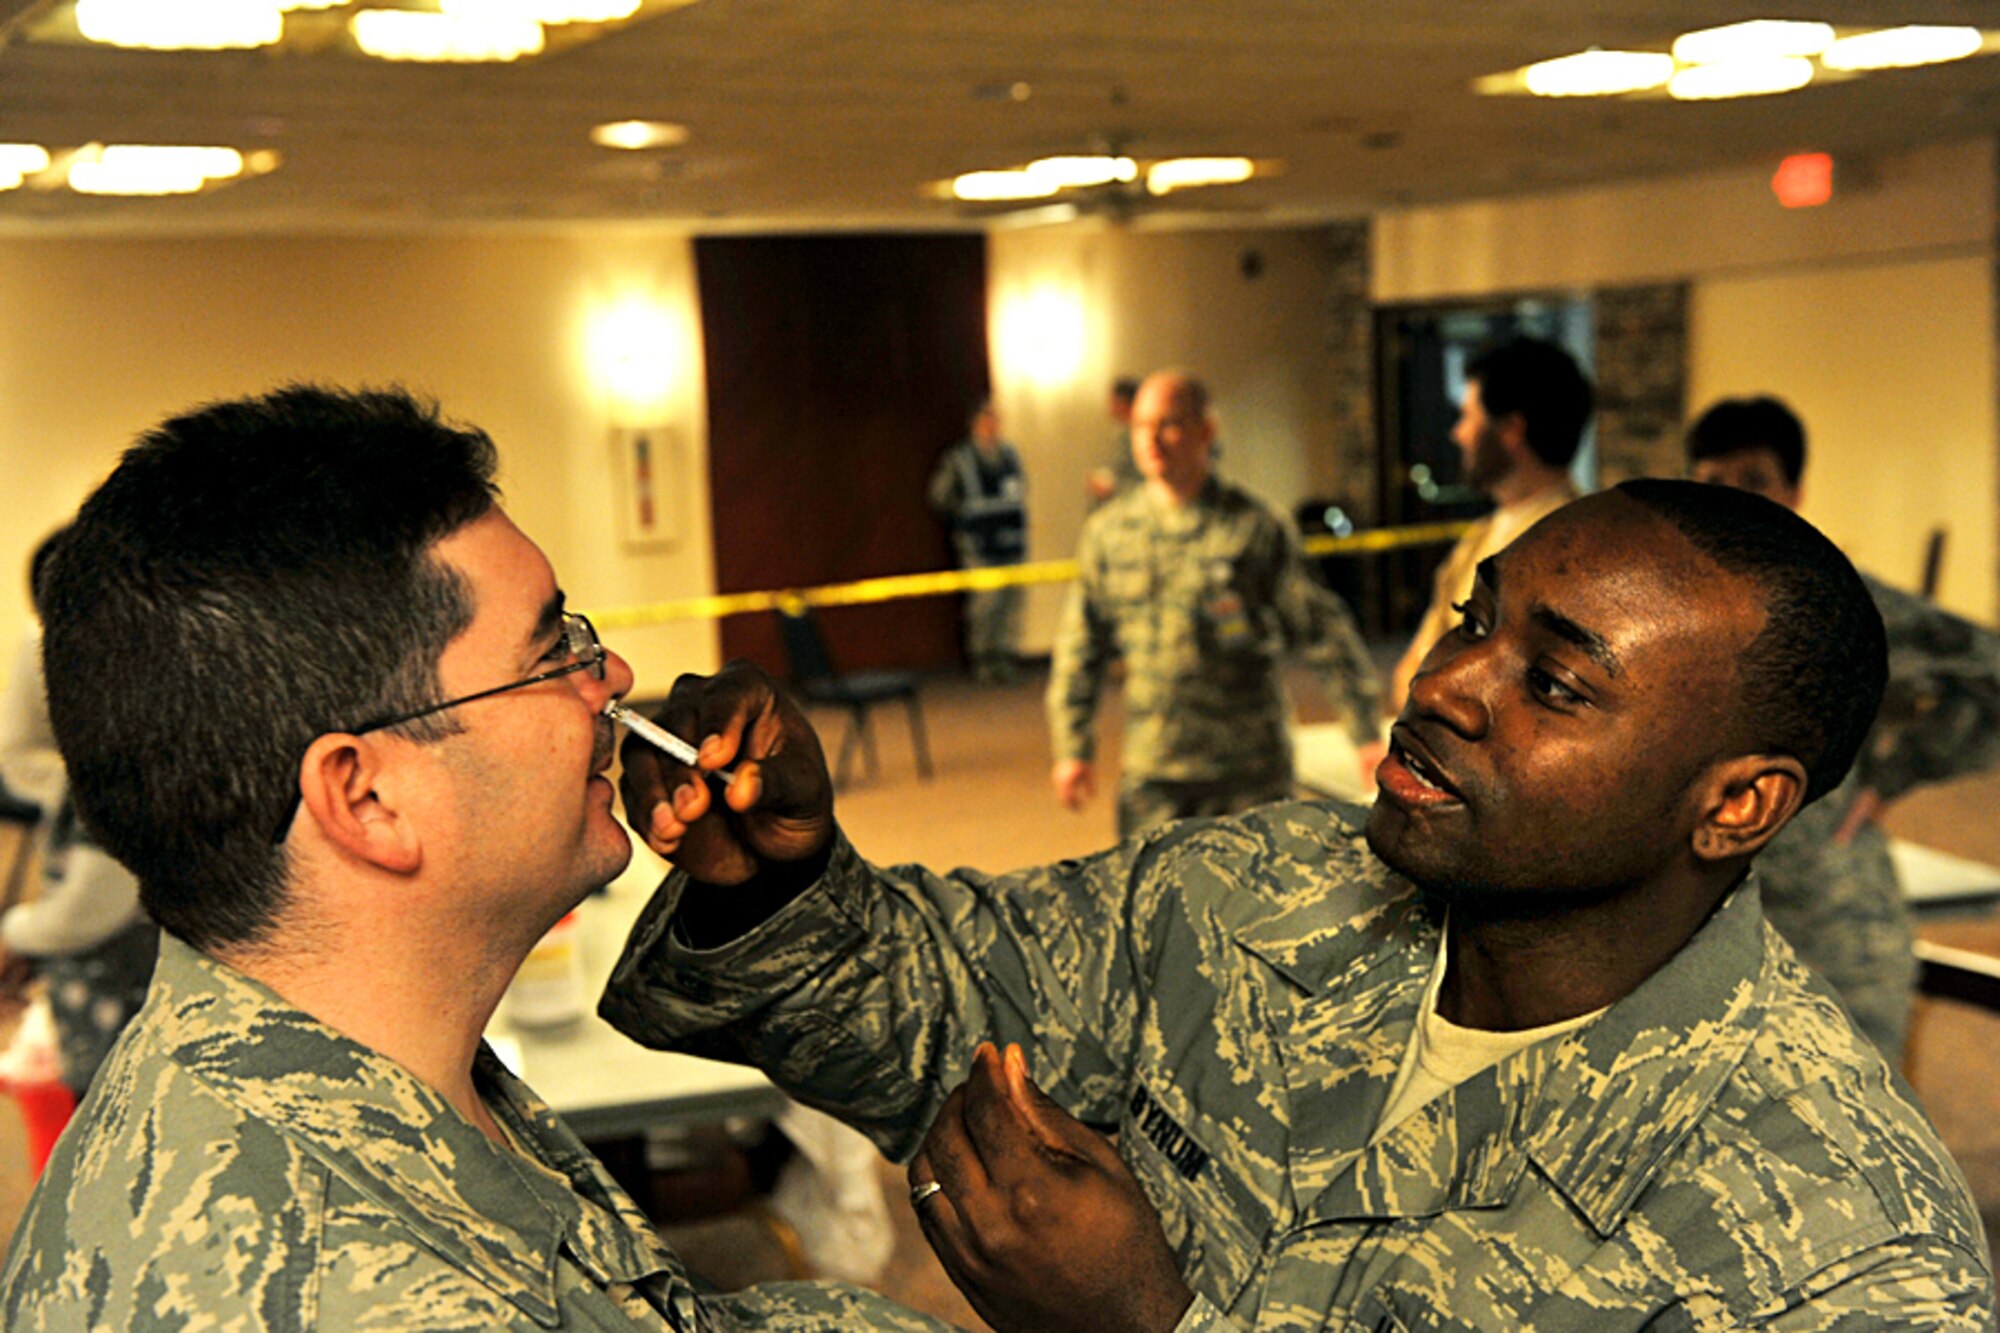 OFFUTT AIR FORCE BASE, Neb. - Master Sgt. Jesse Renteria, with the 55th Maintenance Operations Squadron, receives the H1N1 flu mist inoculation from Staff Sgt. Vashon Bynum, with the 55th Medical Group, during a Point of Distribution exercise Jan. 21 at the community center here. More than 1,000 active-duty personnel processed through the center to test the 55th Wing's ability to respond to a public health emergency.  Many received their H1N1 inoculation during the event. U.S. Air Force photo by Charles Haymond 
